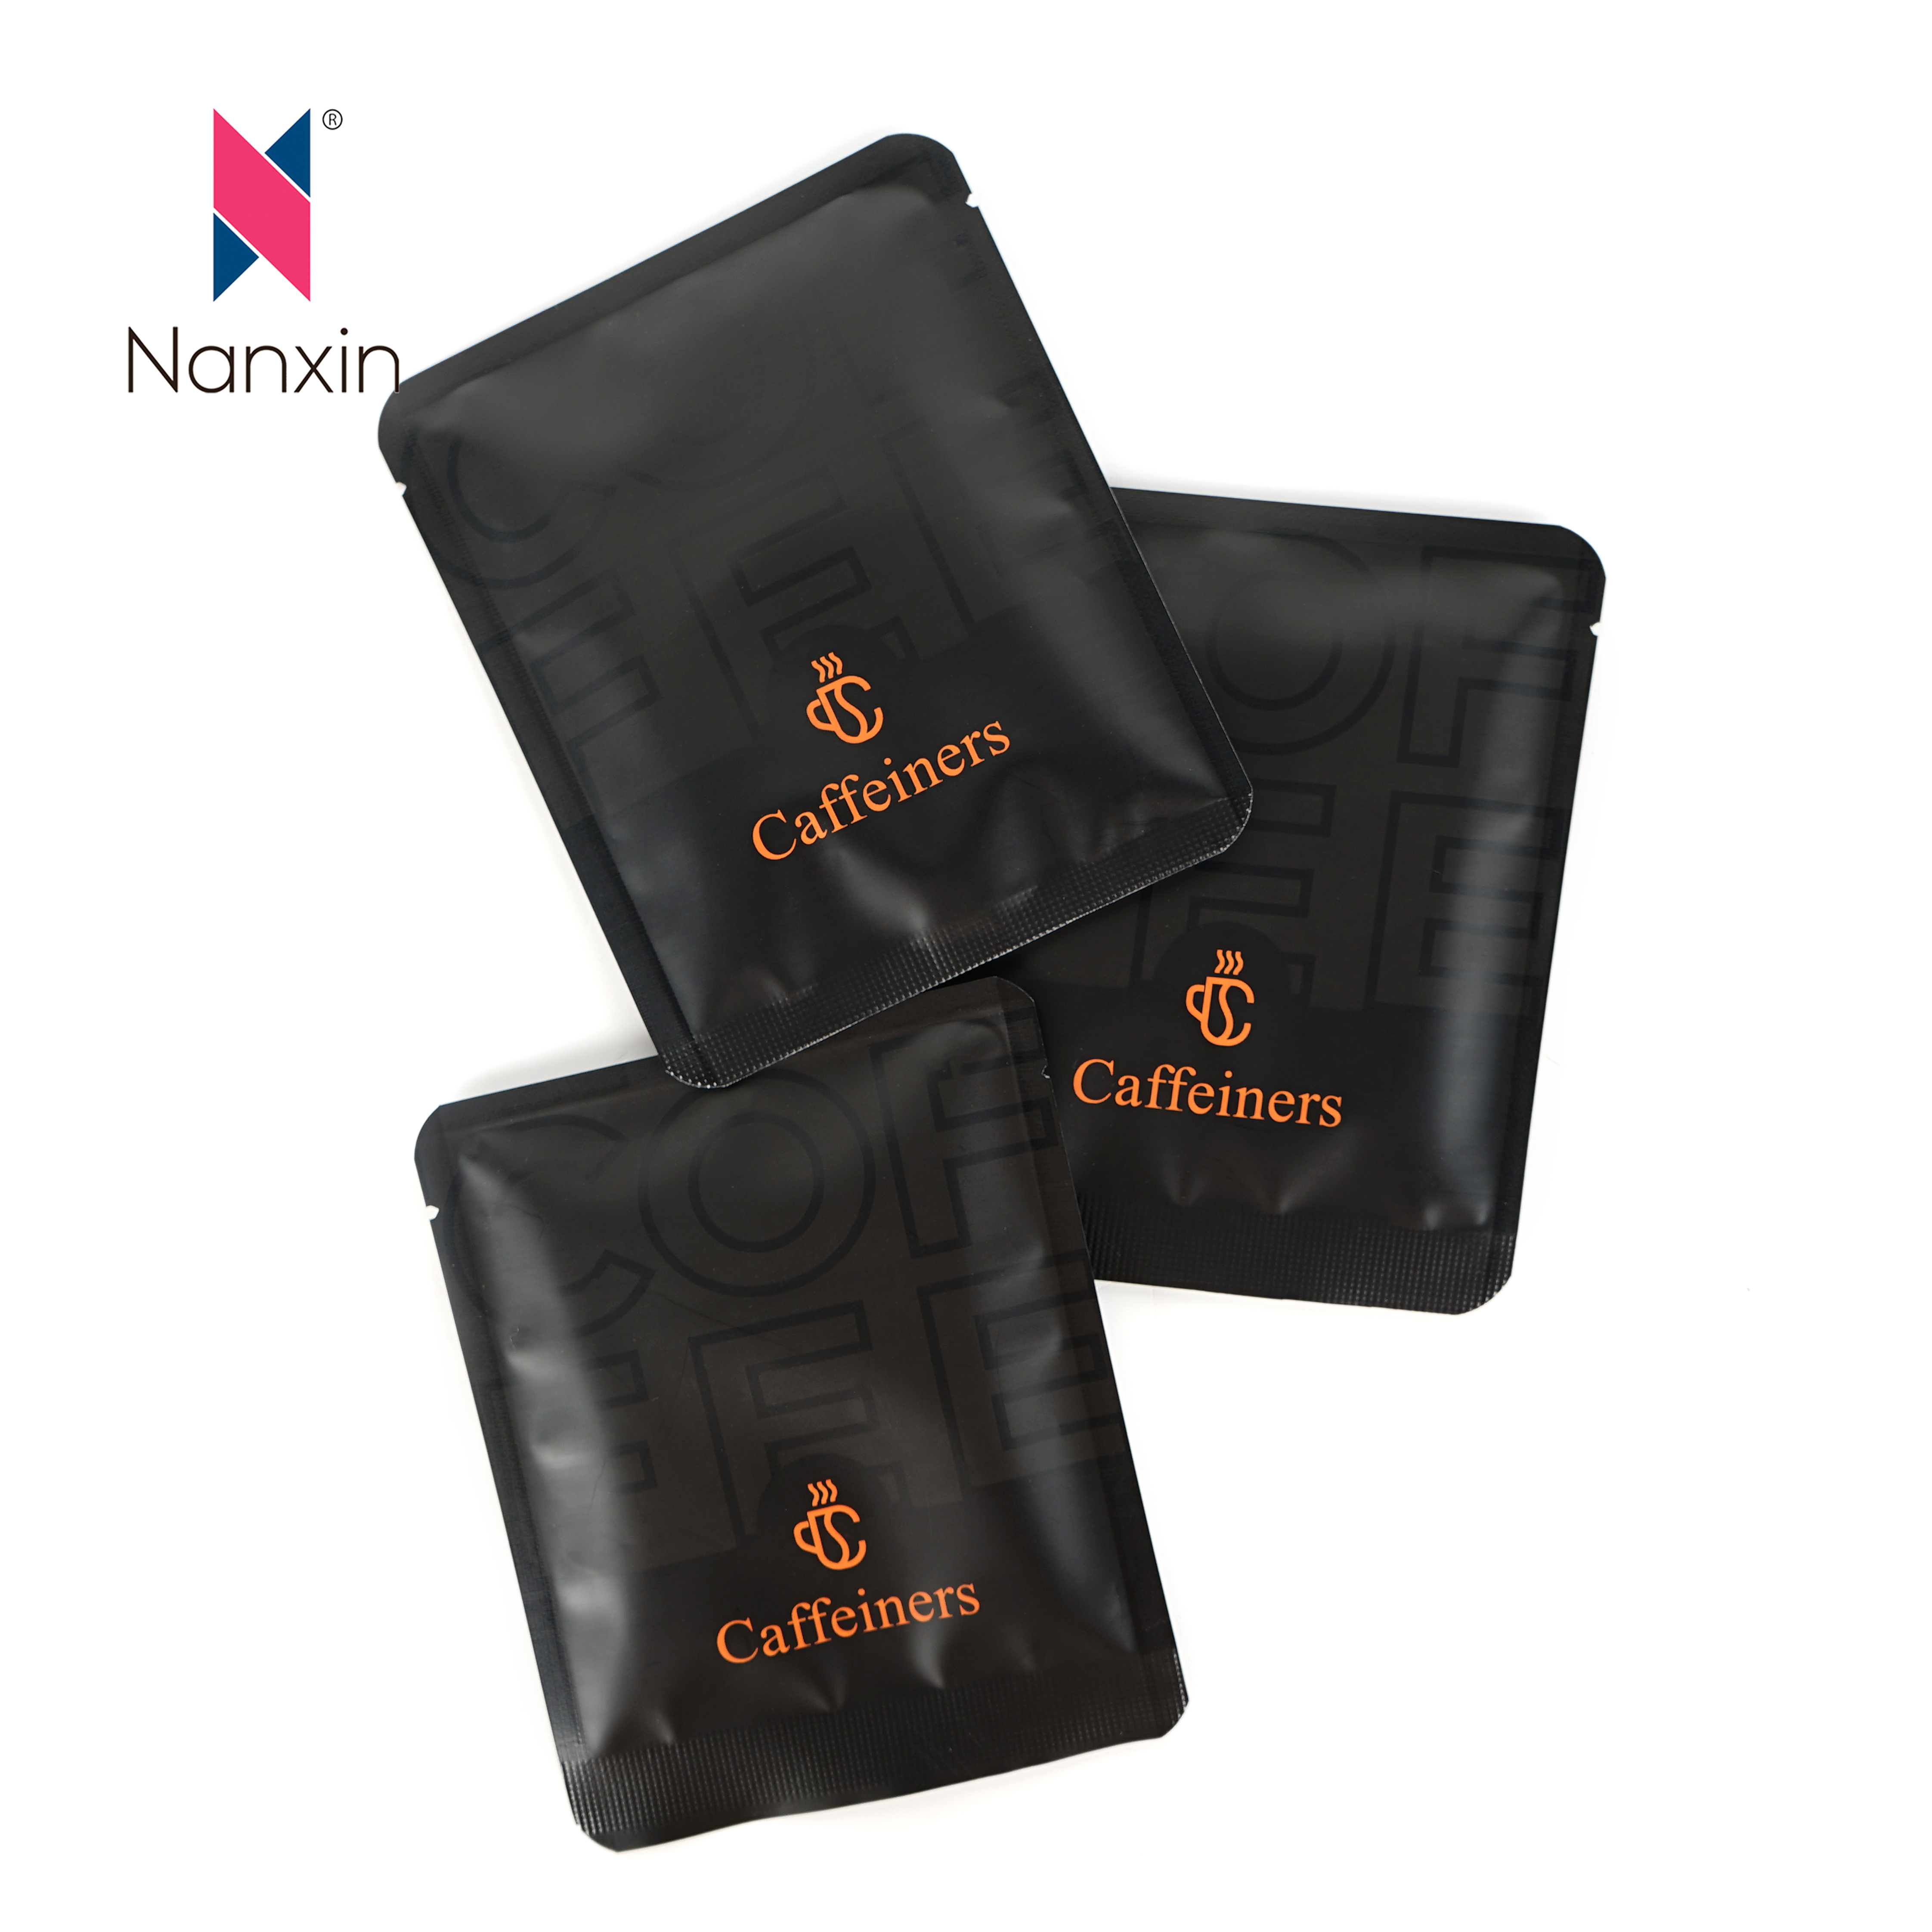 Plastic Stand Up Pouch With Straw Hole: A Convenient Packaging Solution for On-the-Go Beverages